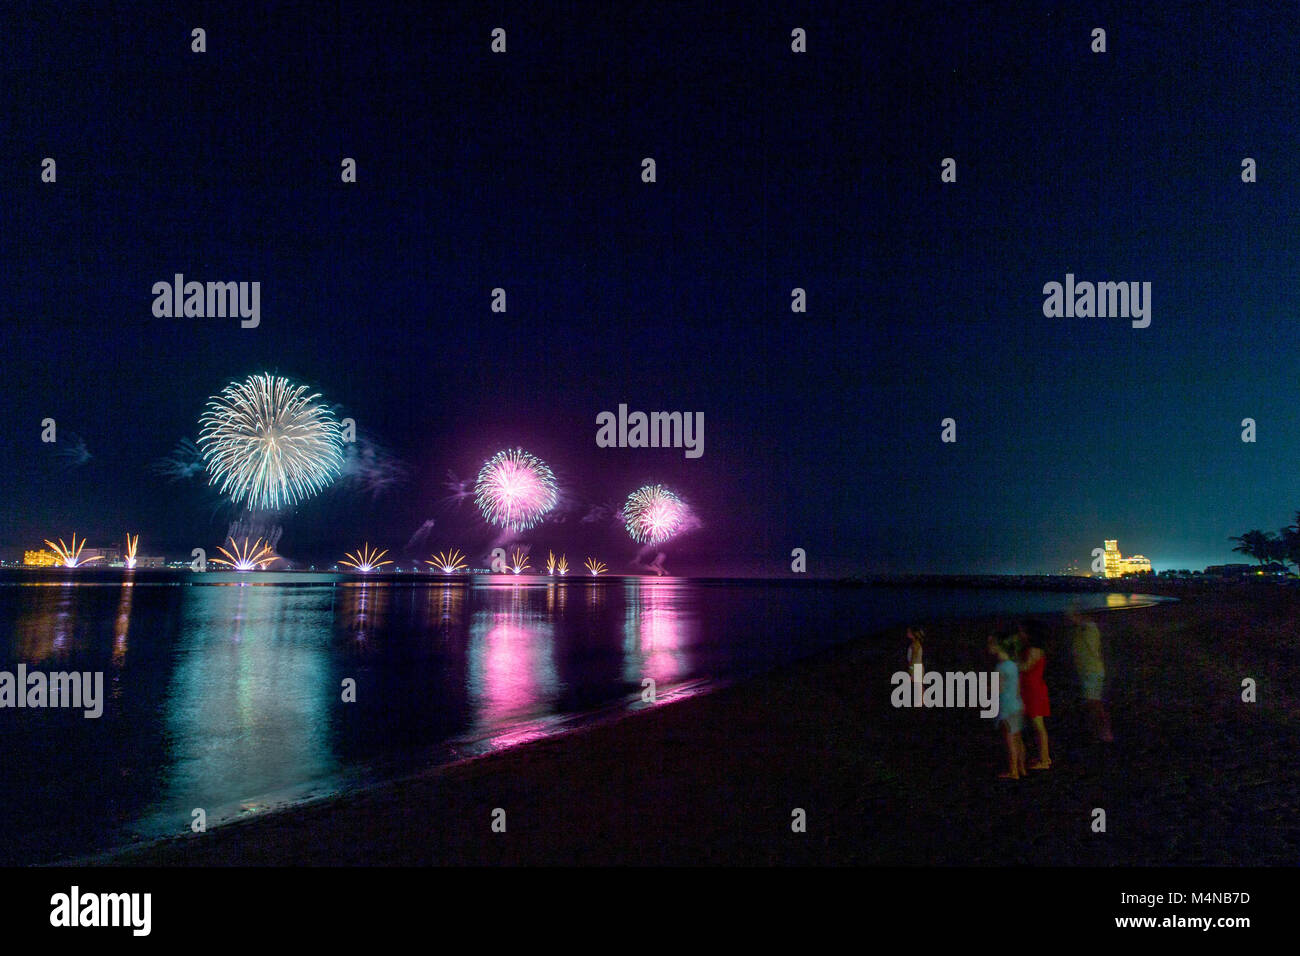 Ras Al Khaimah, United Arab Emirates. 15th Feb, 2018. People seen enjoying the firework from the beach. The UAE Ministry of State for Happiness launched its first Happiness Festival of 2018 in Ras Al Khaimah. The UAE is the only country in the world that has a Ministry for happiness and positivity. A key feature of the Festival is that it ends with a fireworks display. The Waldorf Astoria Ras Al Khaimah is seen in the distance during the fireworks display. Credit: Mike Hook/SOPA/ZUMA Wire/Alamy Live News Stock Photo